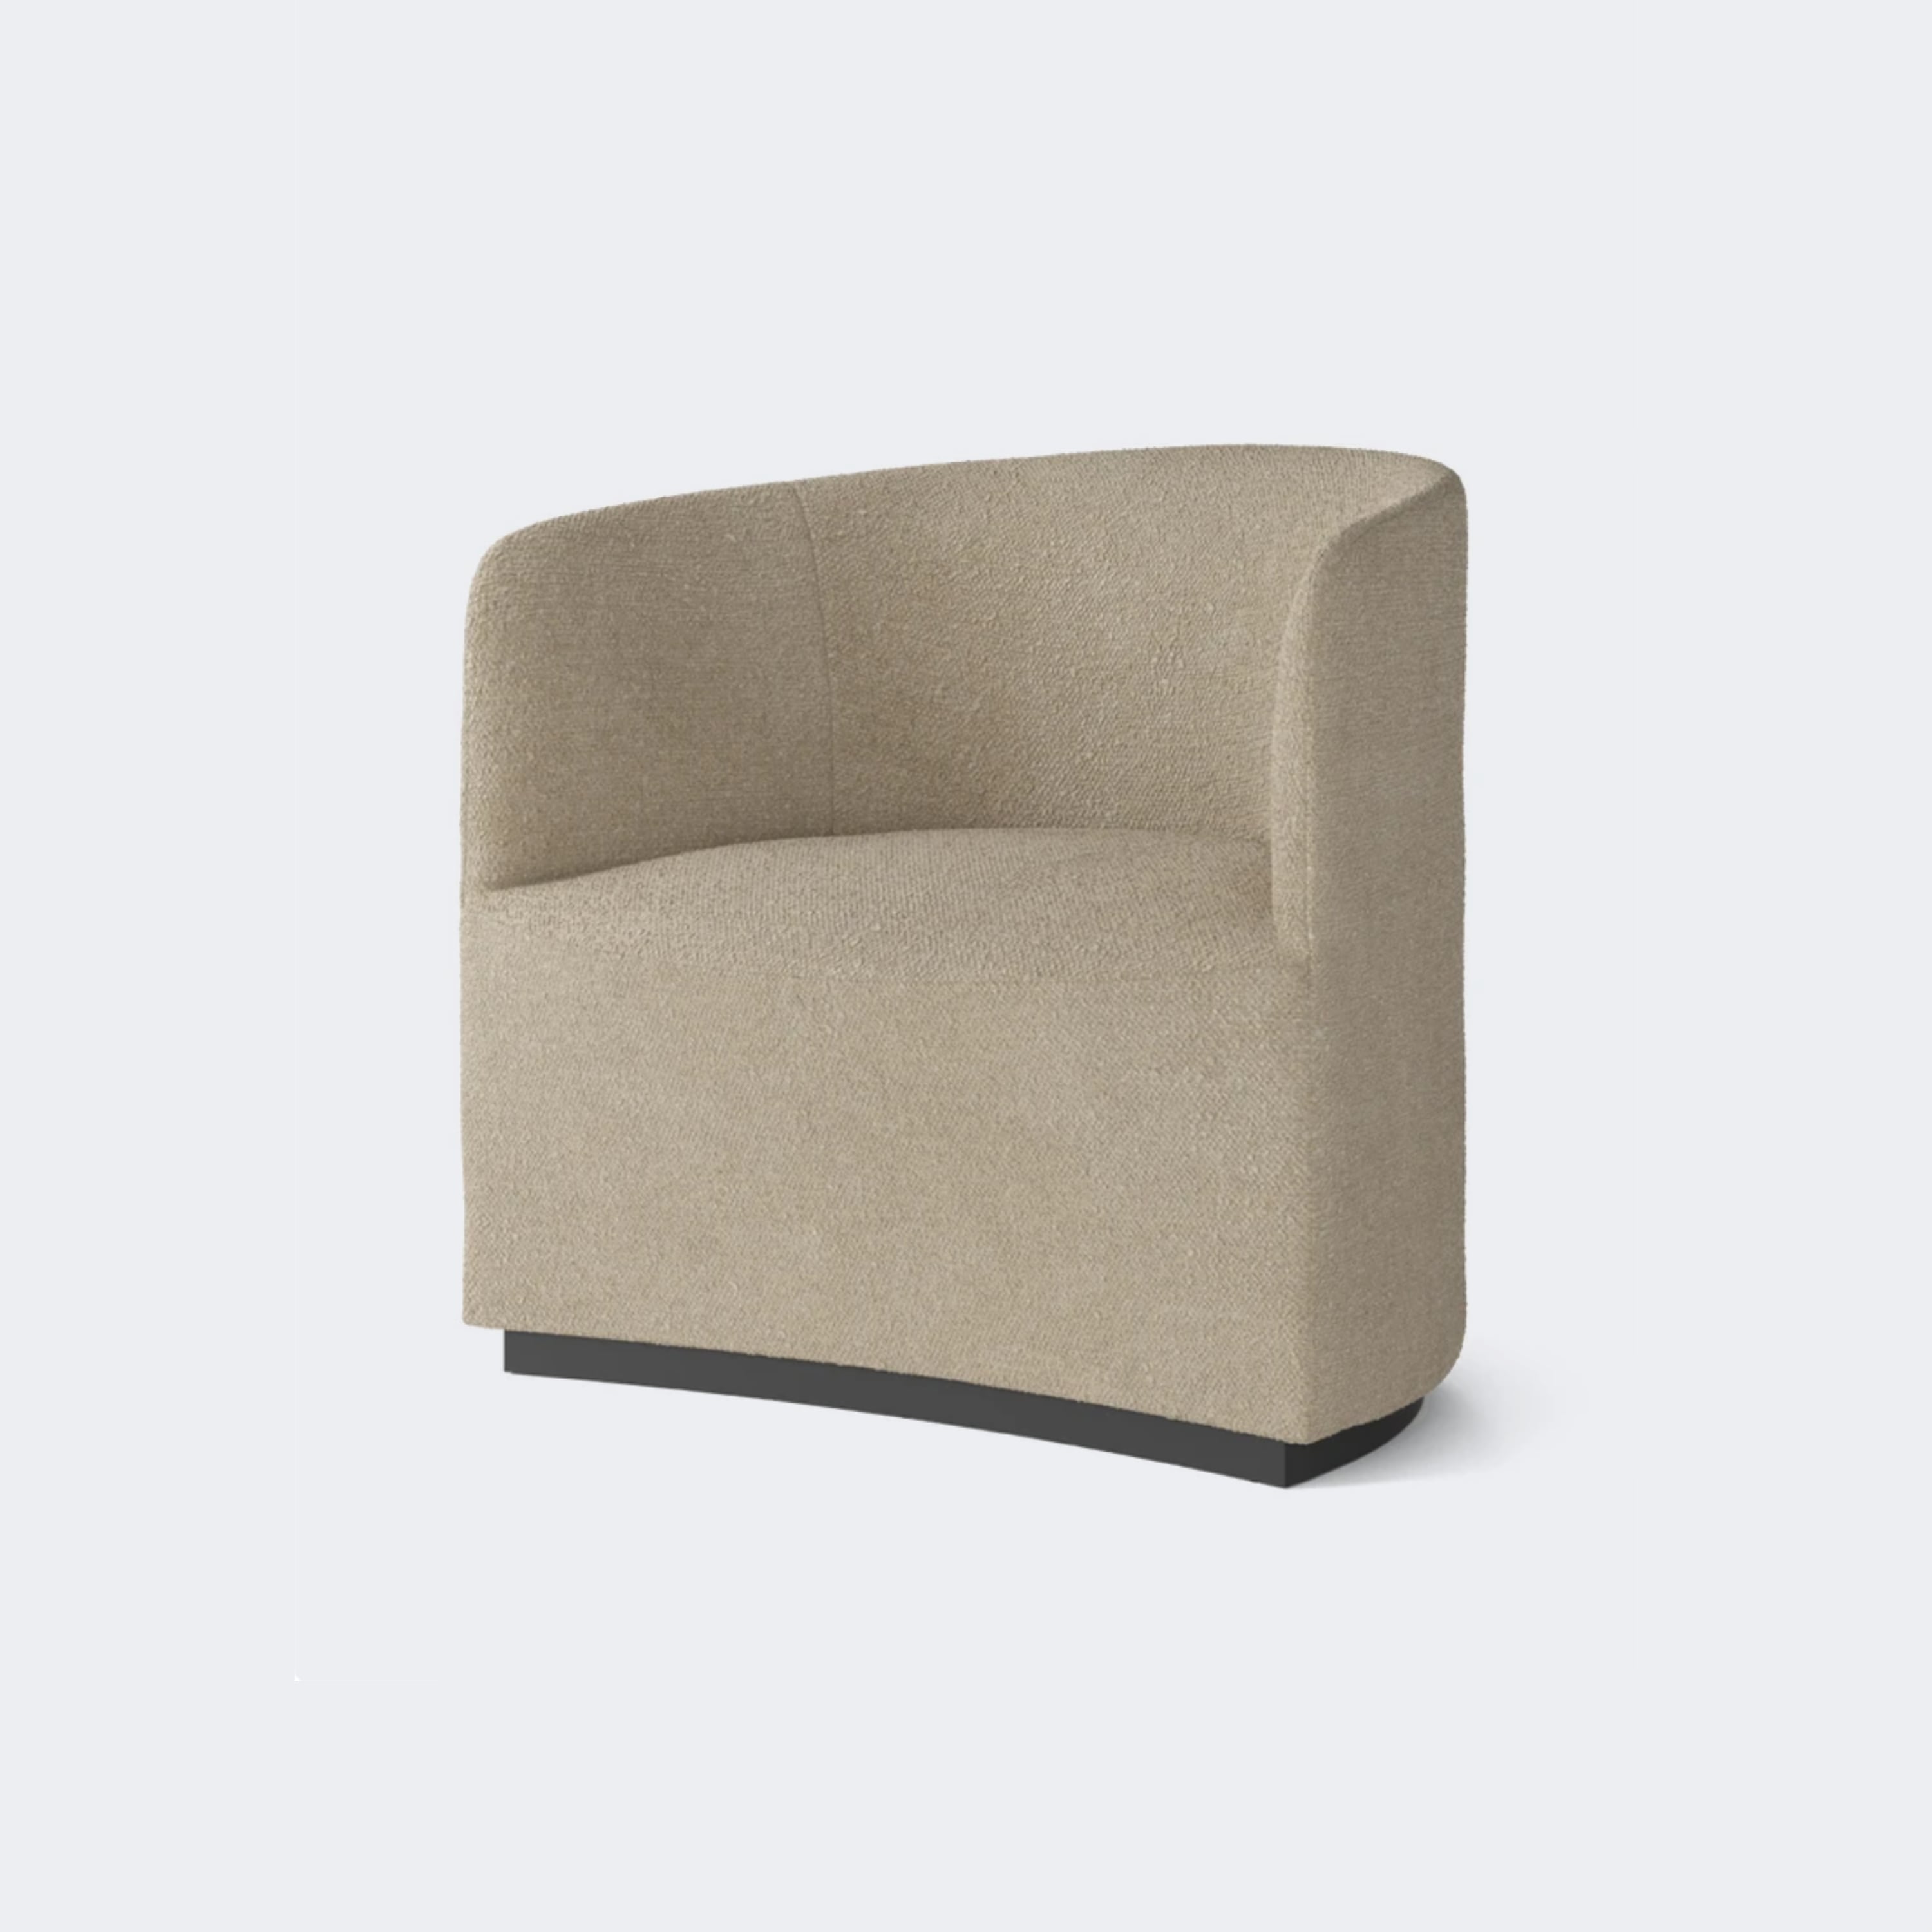 Audo Copenhagen Tearoom Chairs Lounge Chair Made To Order (10-12 Weeks) MENU Boucle #02 (Beige) - KANSO